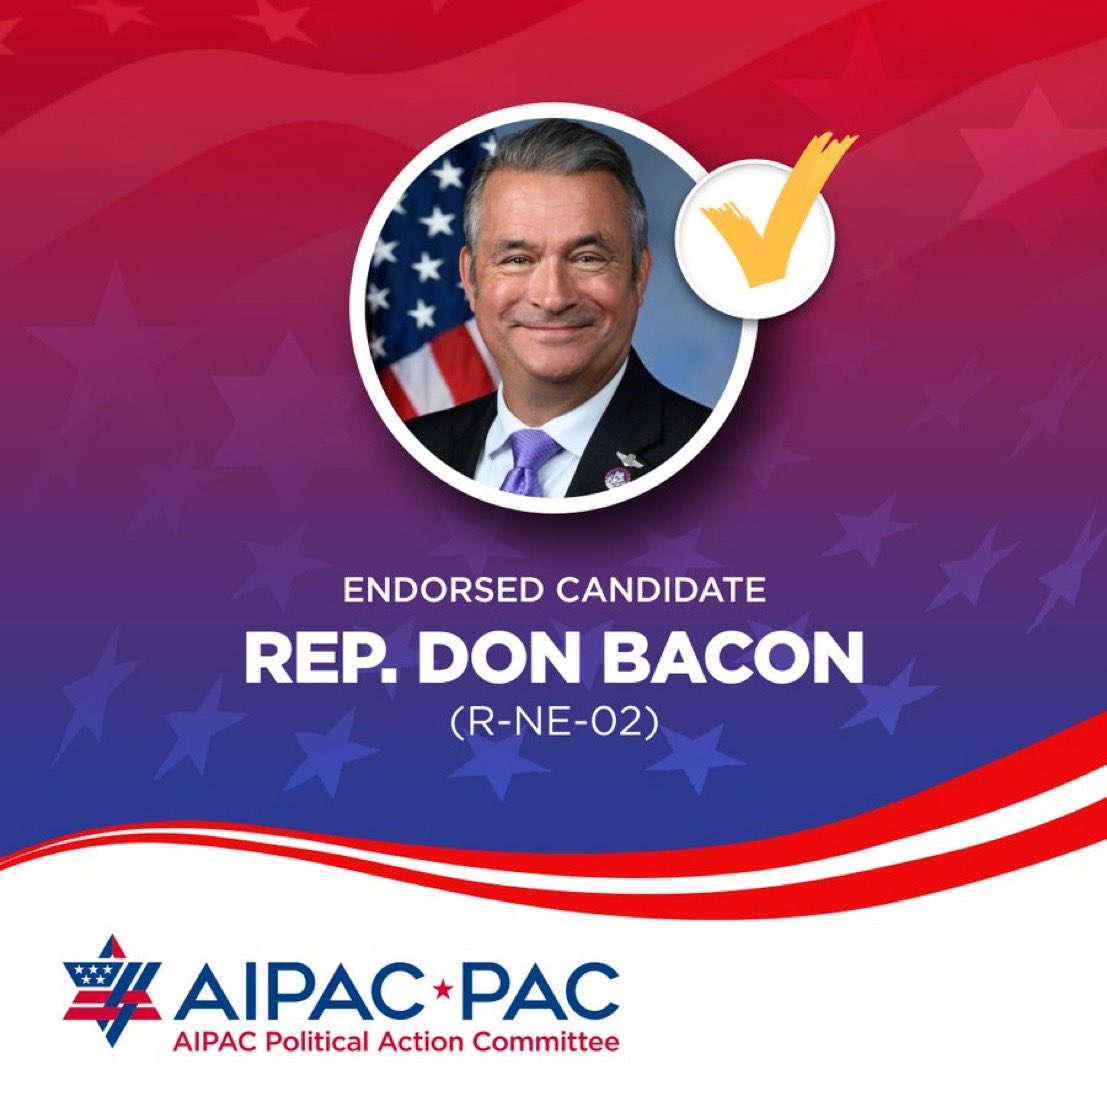 Congratulations to AIPAC-endorsed pro-Israel champion @DonJBacon on your primary election victory! We are proud to support pro-Israel candidates who help strengthen and expand the U.S.-Israel relationship. Being pro-Israel is good policy and good politics.